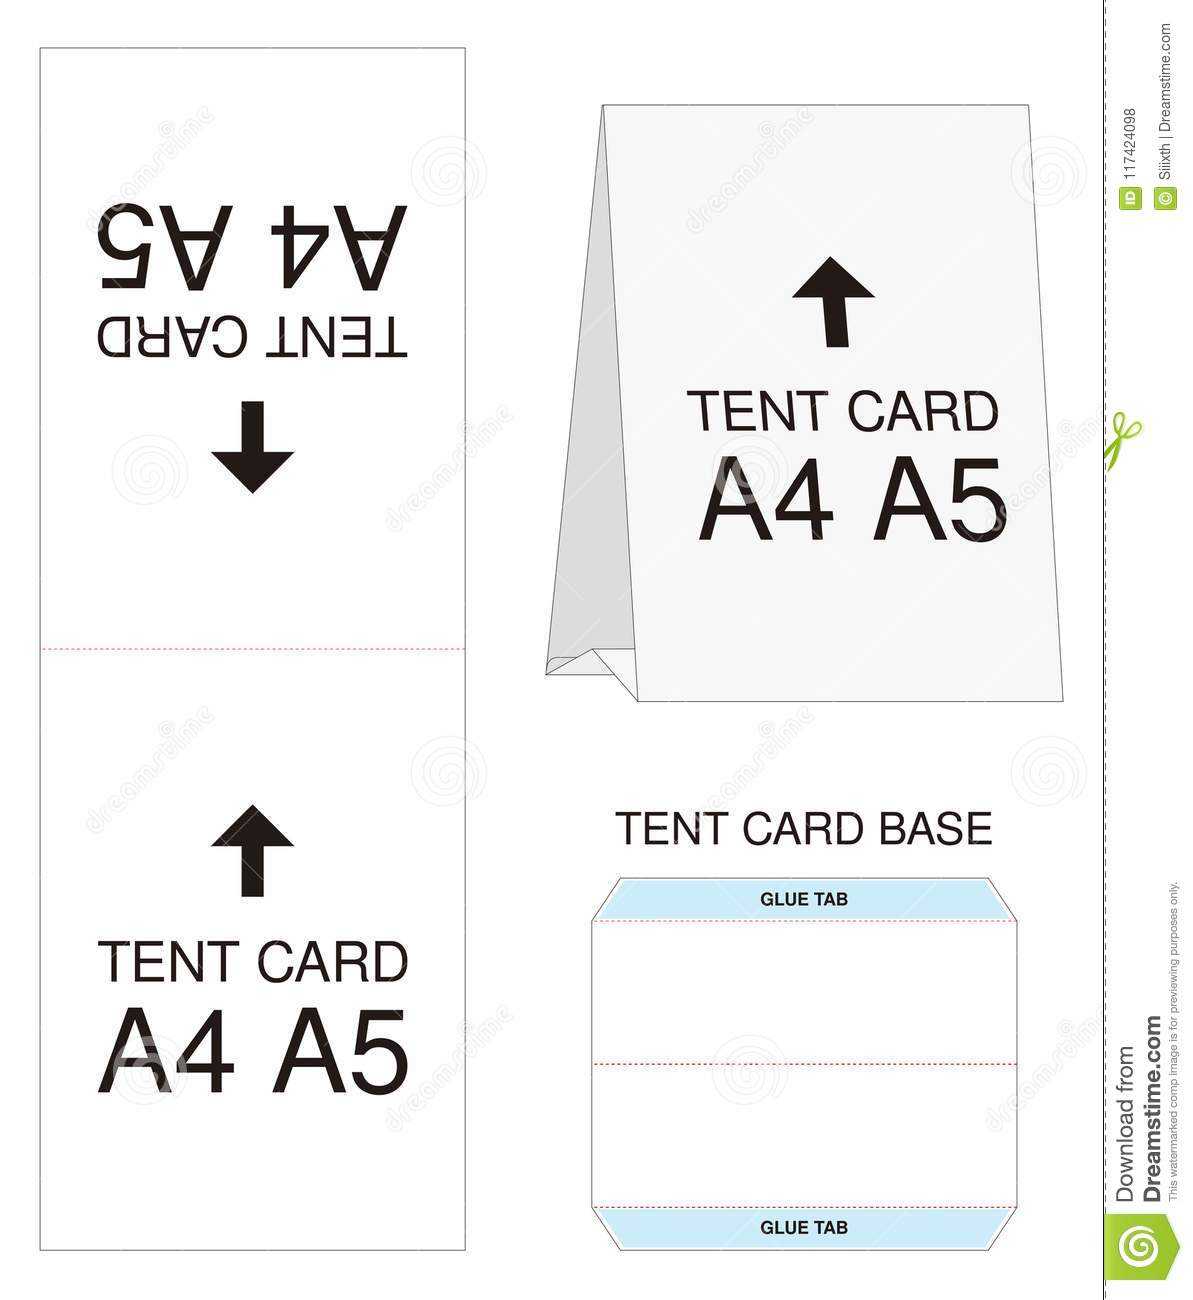 Tent Card A4 A5 Size Mock Up Die Cut Stock Vector Pertaining To Free Tent Card Template Downloads